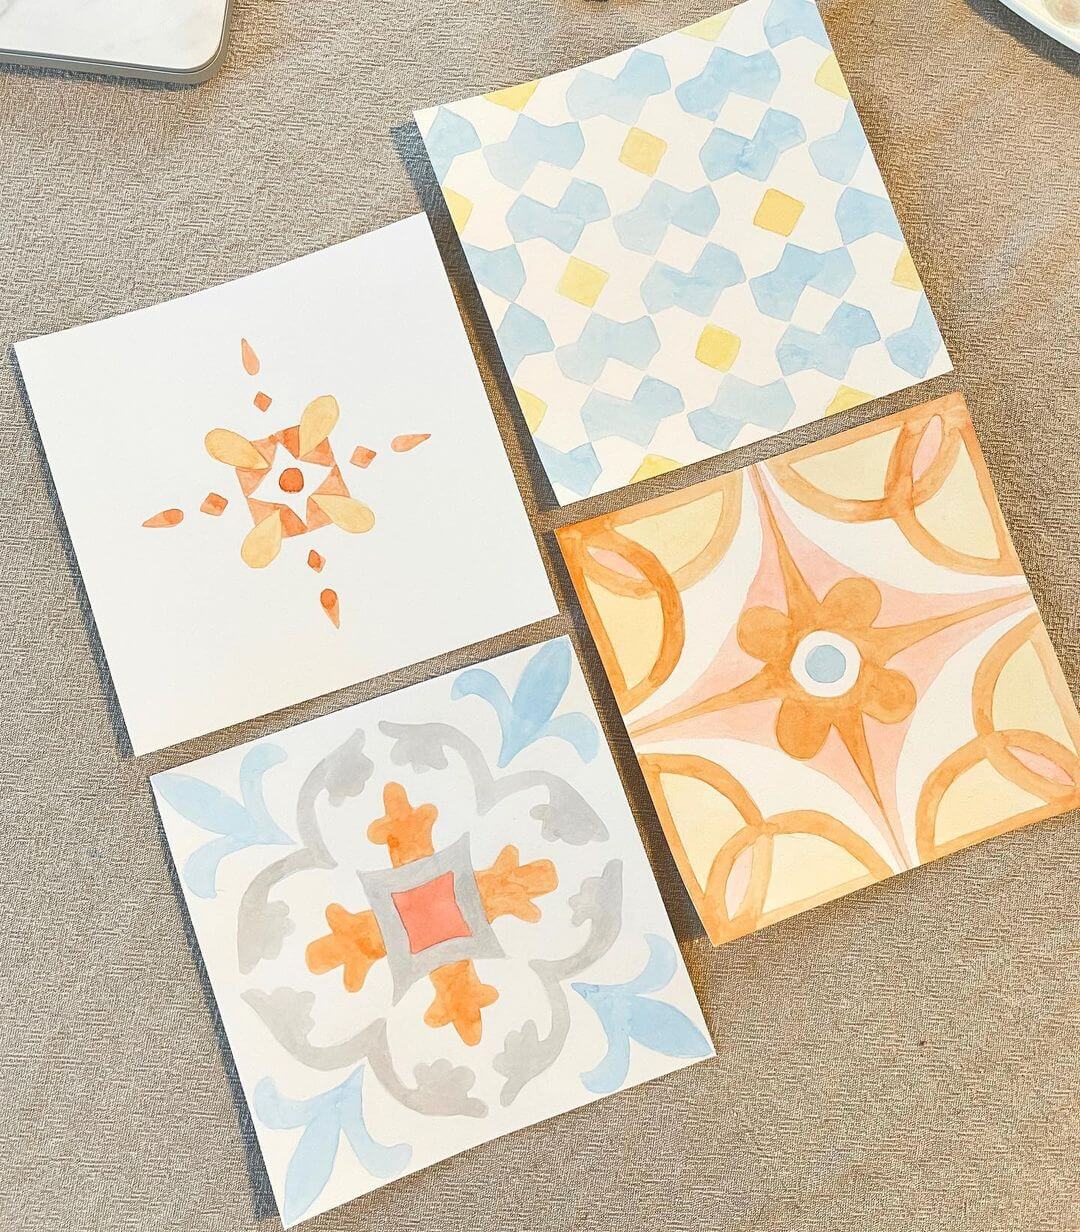 Four Mediterranean style tiles, each with different designs and painted in watercolour.